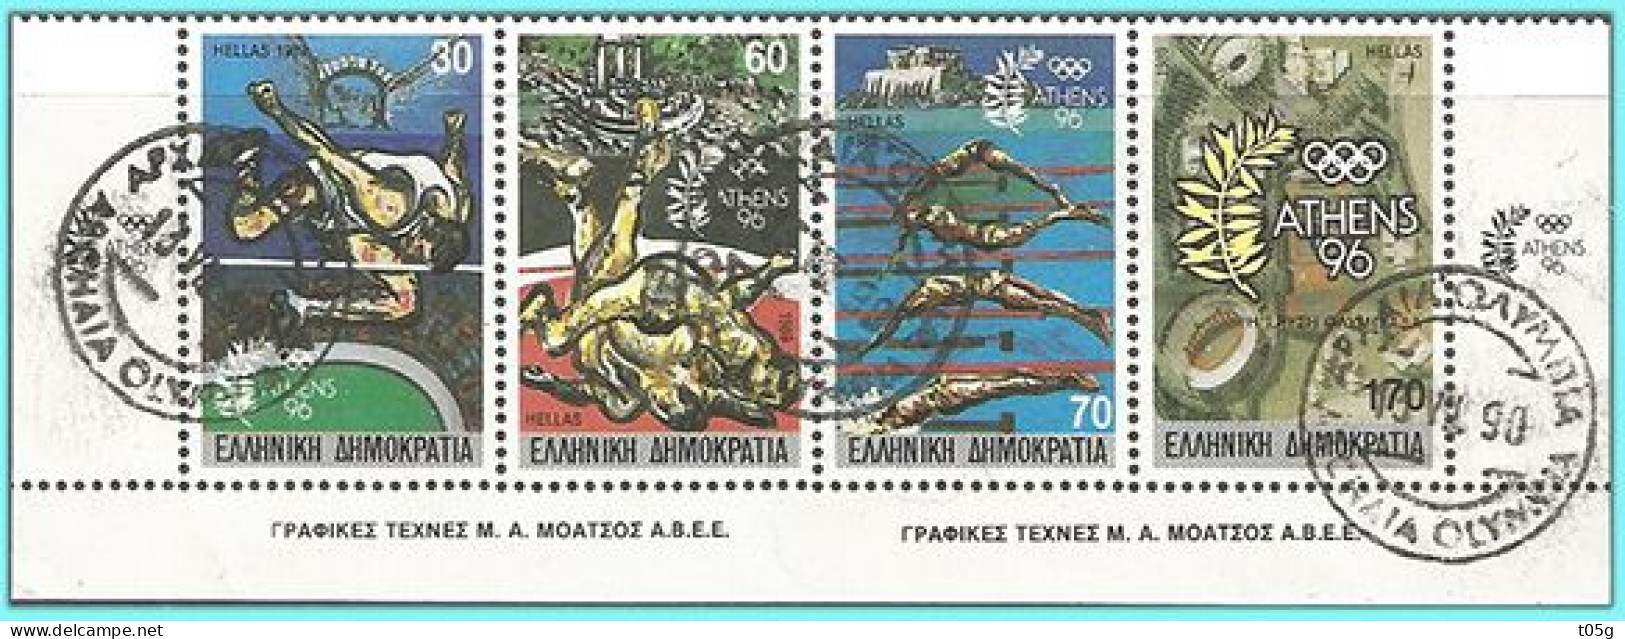 GREECE-GRECE- HELLAS  1989:  Greece Home Of The Olympic Games  Se -tenant  Imperforate All Aroud  From Sheet complet  S - Used Stamps